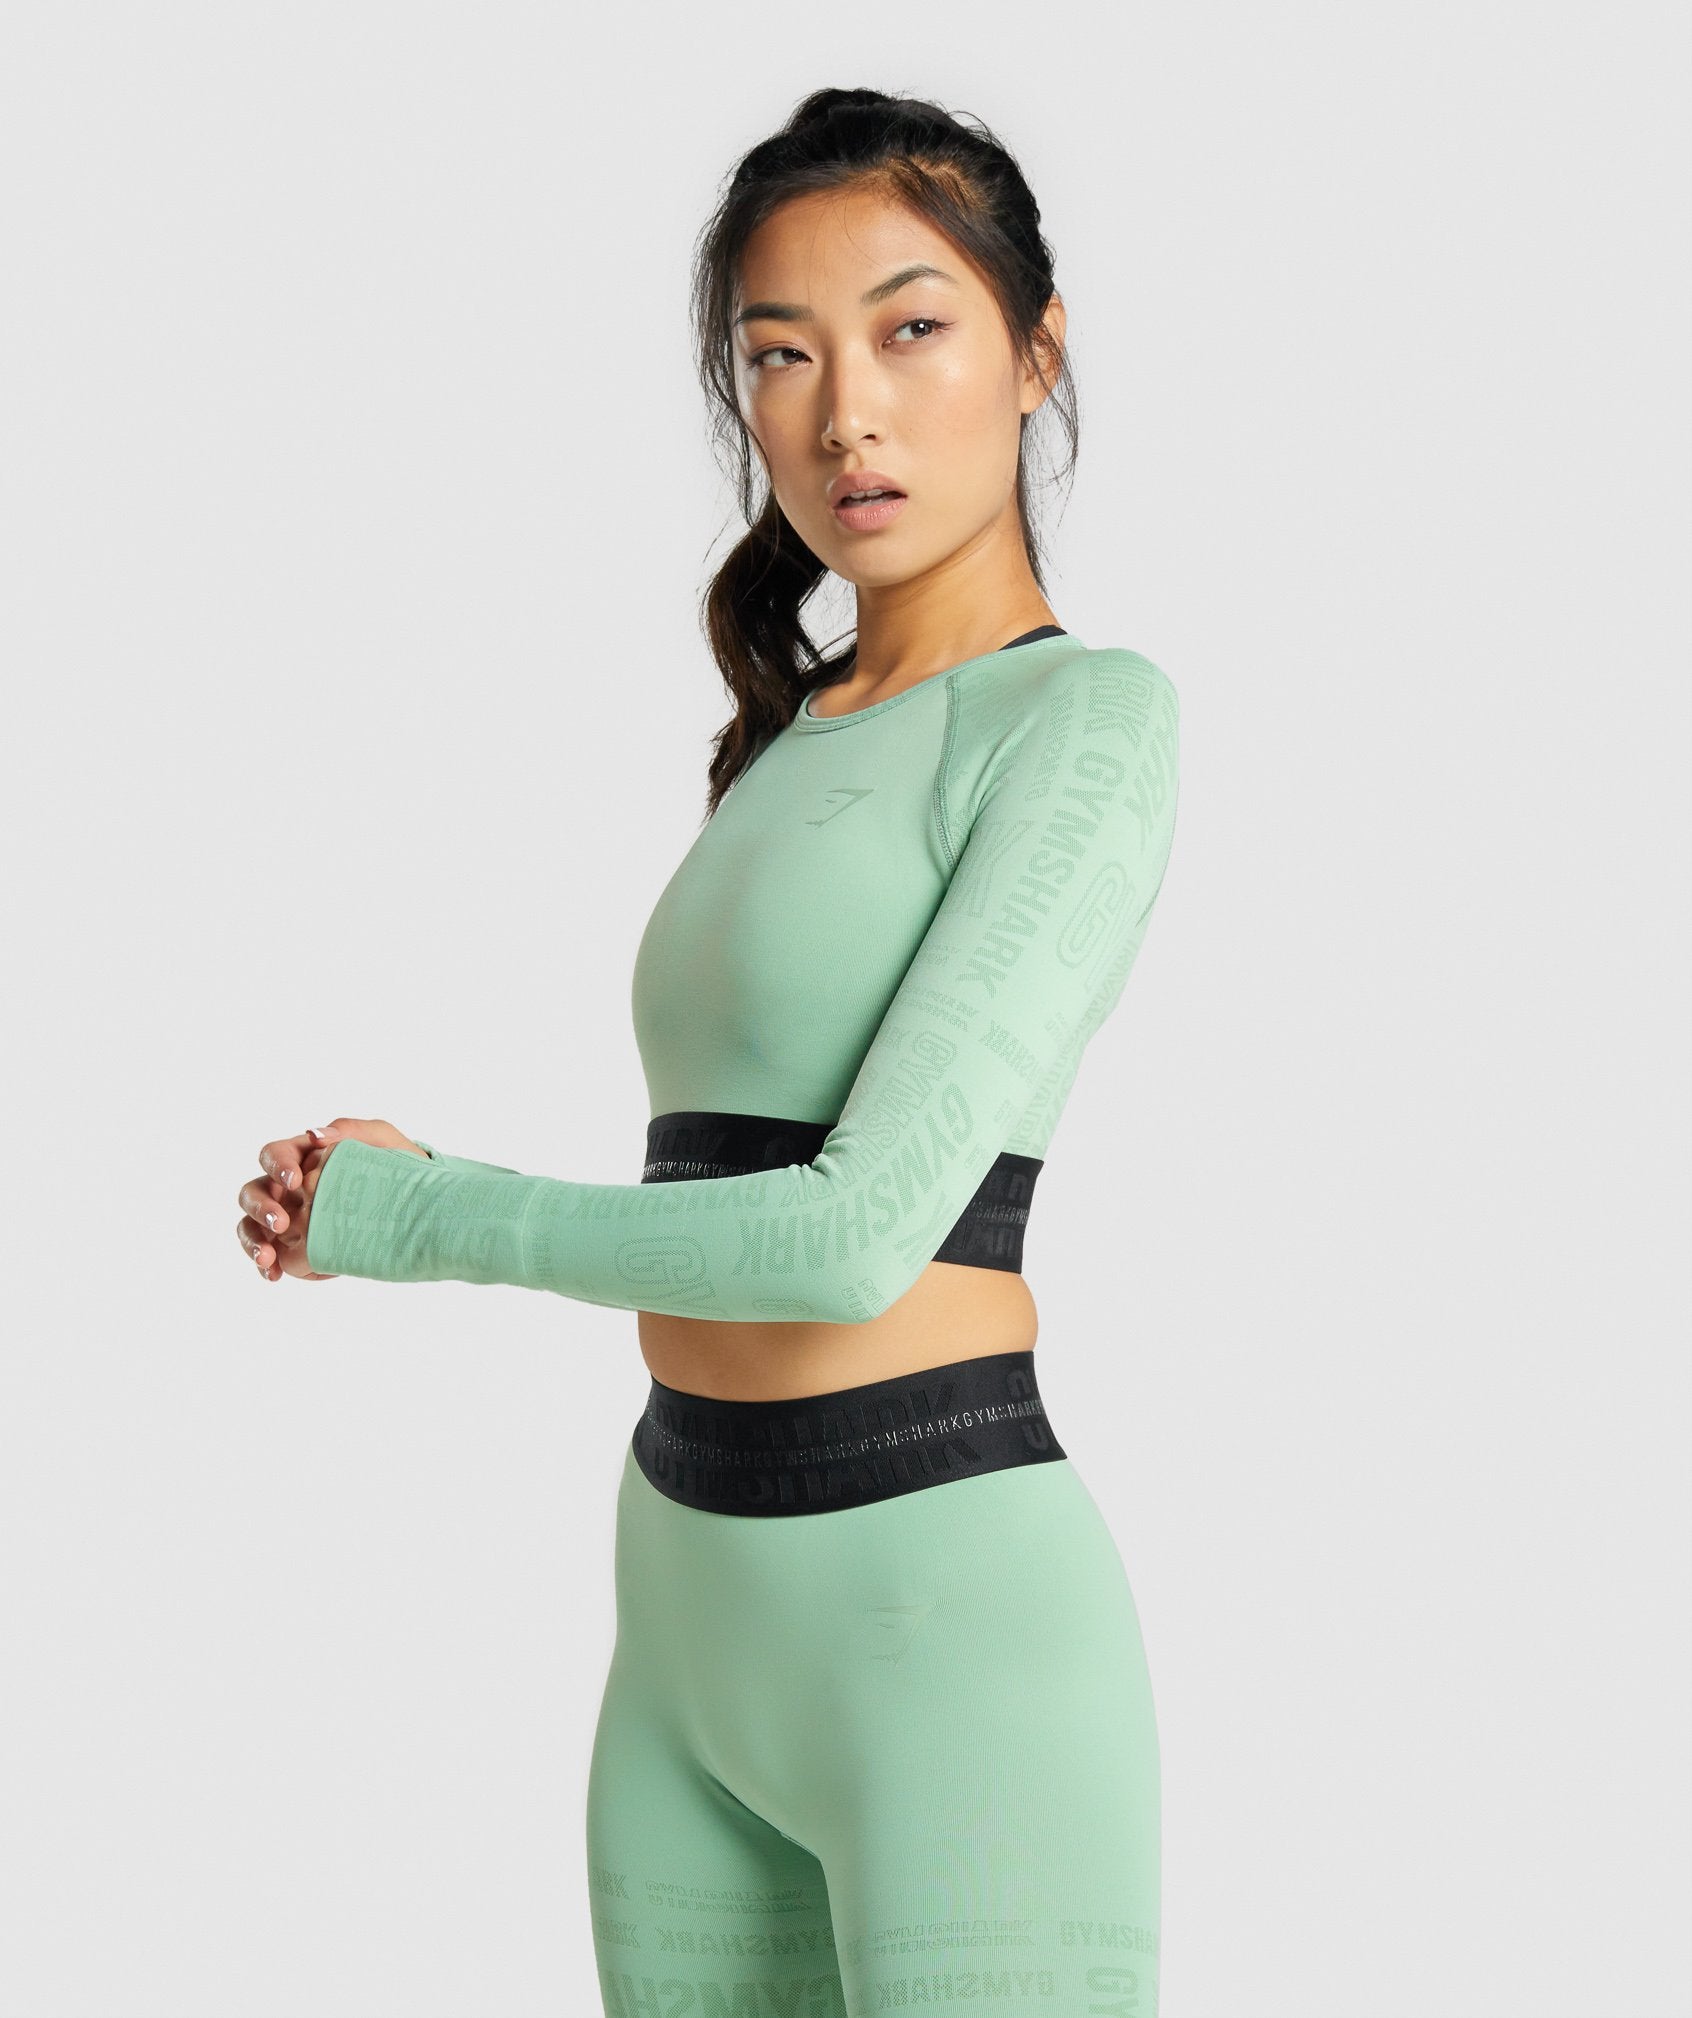 Gymshark Vision Long Sleeve Crop Top - Black – Client 446 100K products